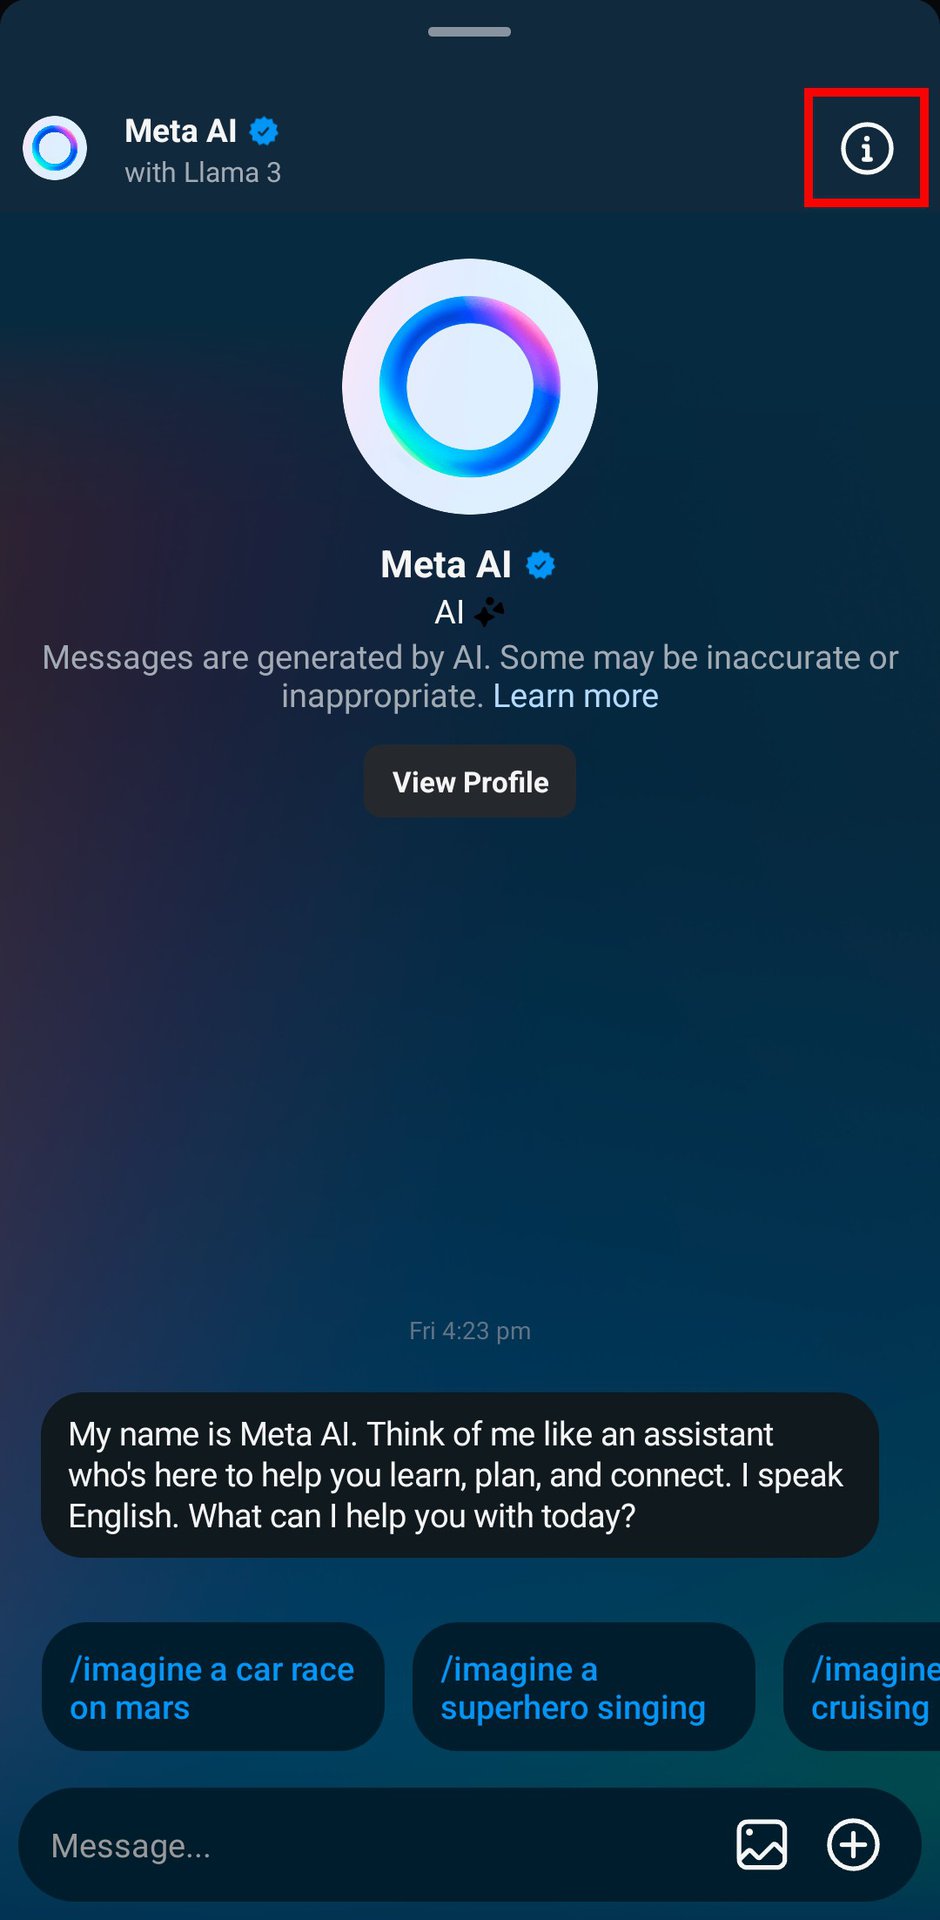 Can you turn off Meta AI on Facebook, Instagram, and WhatsApp?